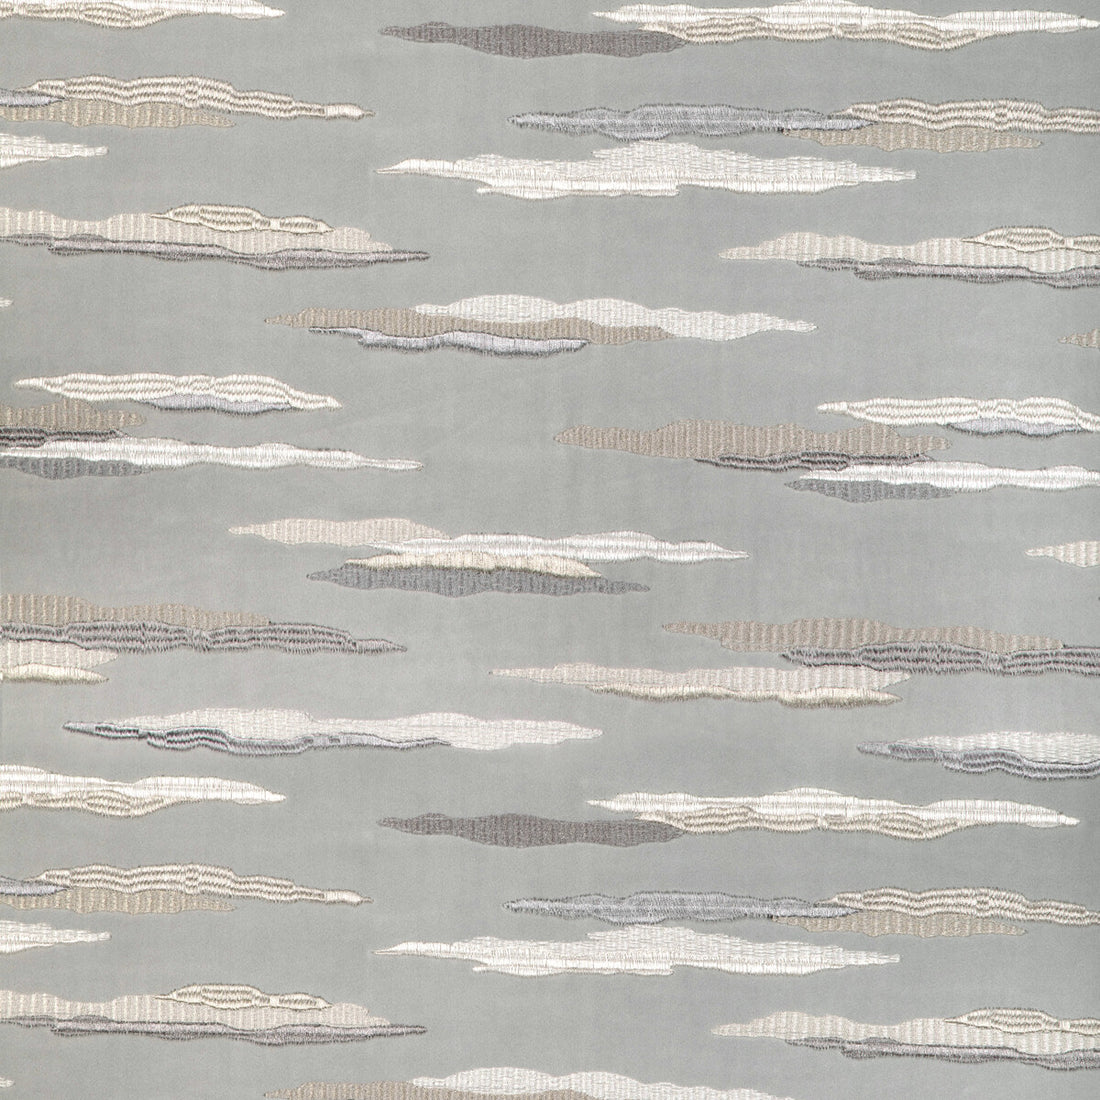 Constant Motion fabric in dune color - pattern 36819.21.0 - by Kravet Design in the Candice Olson collection